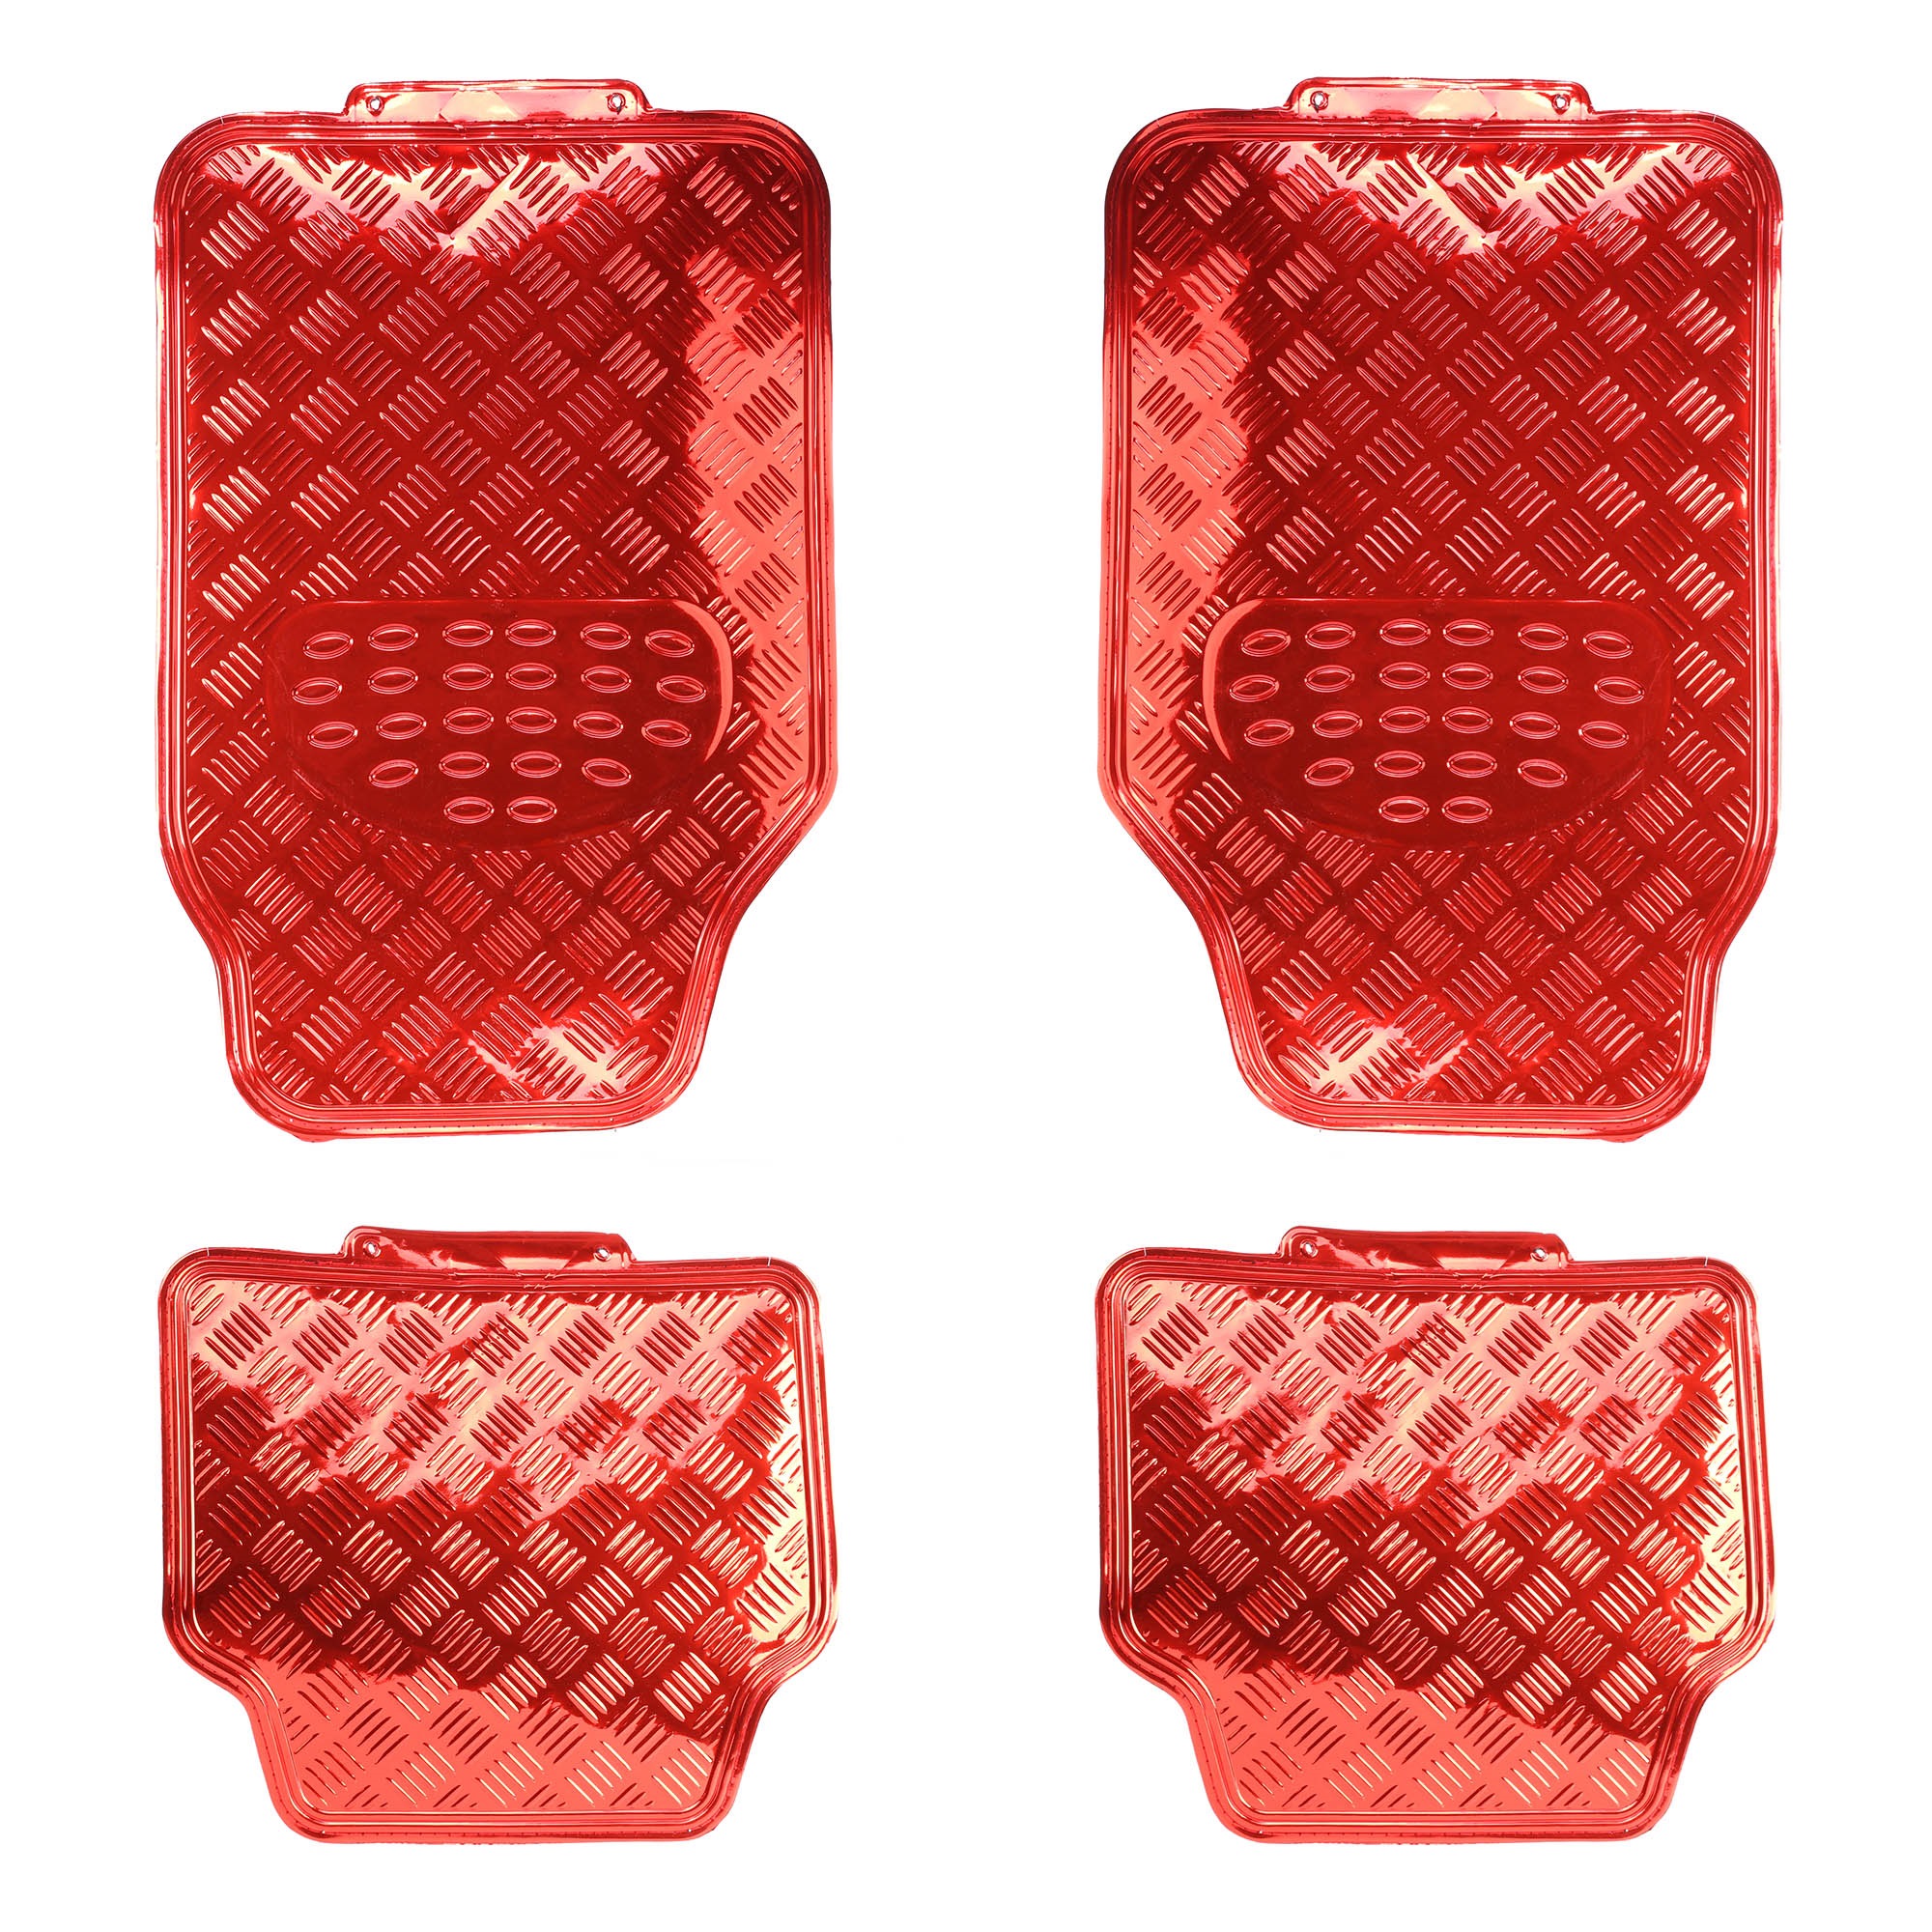 WALSER 28021 Floor mats Rubber, Front and Rear, Quantity: 4, red, Universal fit, 70.5 x 49, 42.5 x 48